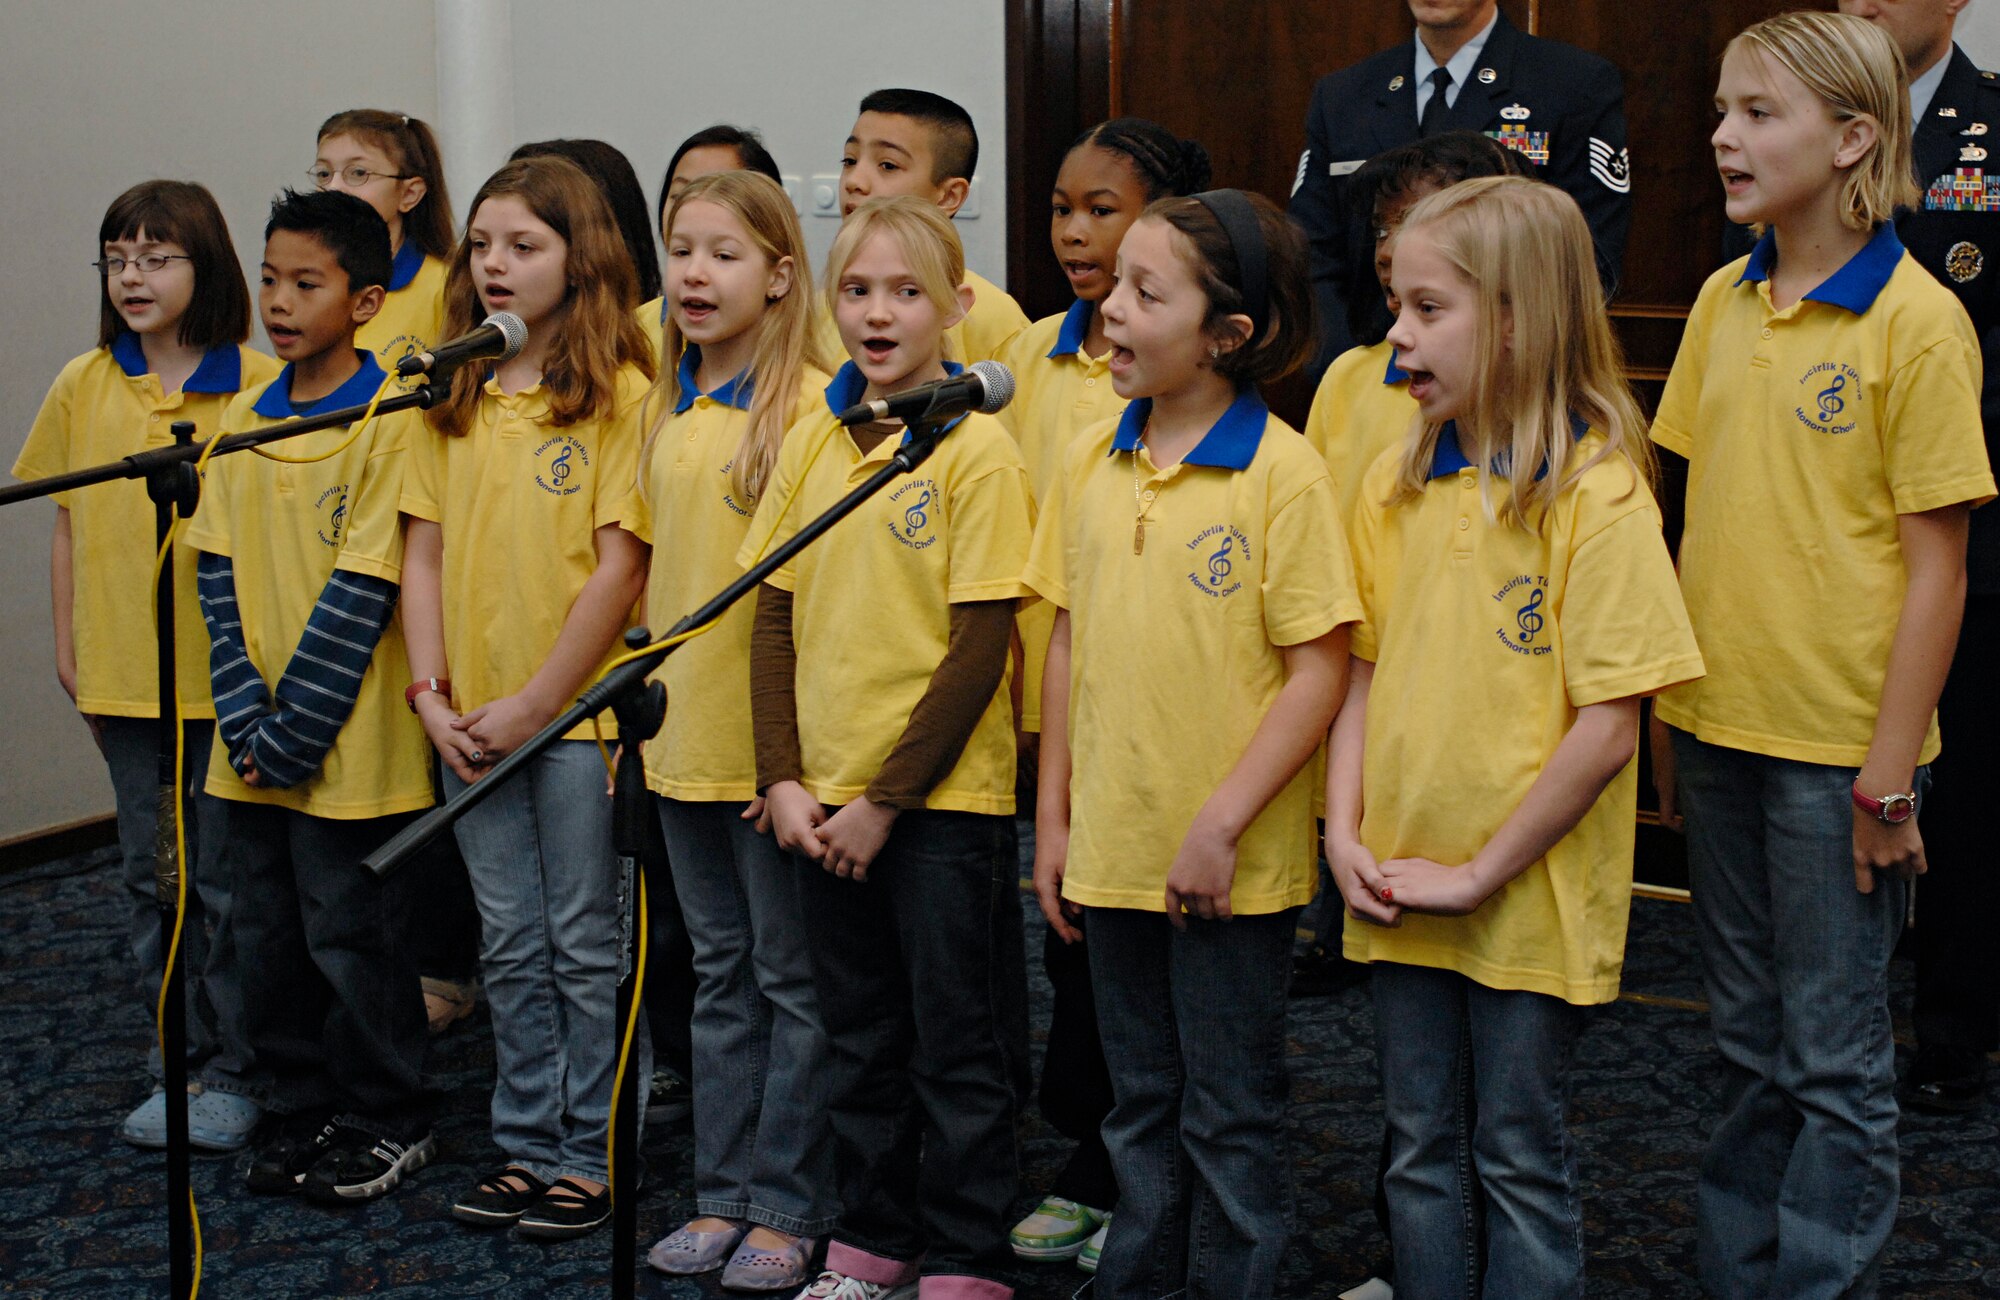 The Incirlik Unit School’s Honors Choir sings “God Bless America” during the annual National Prayer Observance breakfast held at the Incirlik Combined Club, Jan. 26. The annual National Prayer Observance is a traditional event where the president, members of congress and other government leaders gather to reaffirm our nation’s spiritual heritage and to seek divine guidance. (U.S. Air Force photo/Senior Airman Benjamin Wilson)